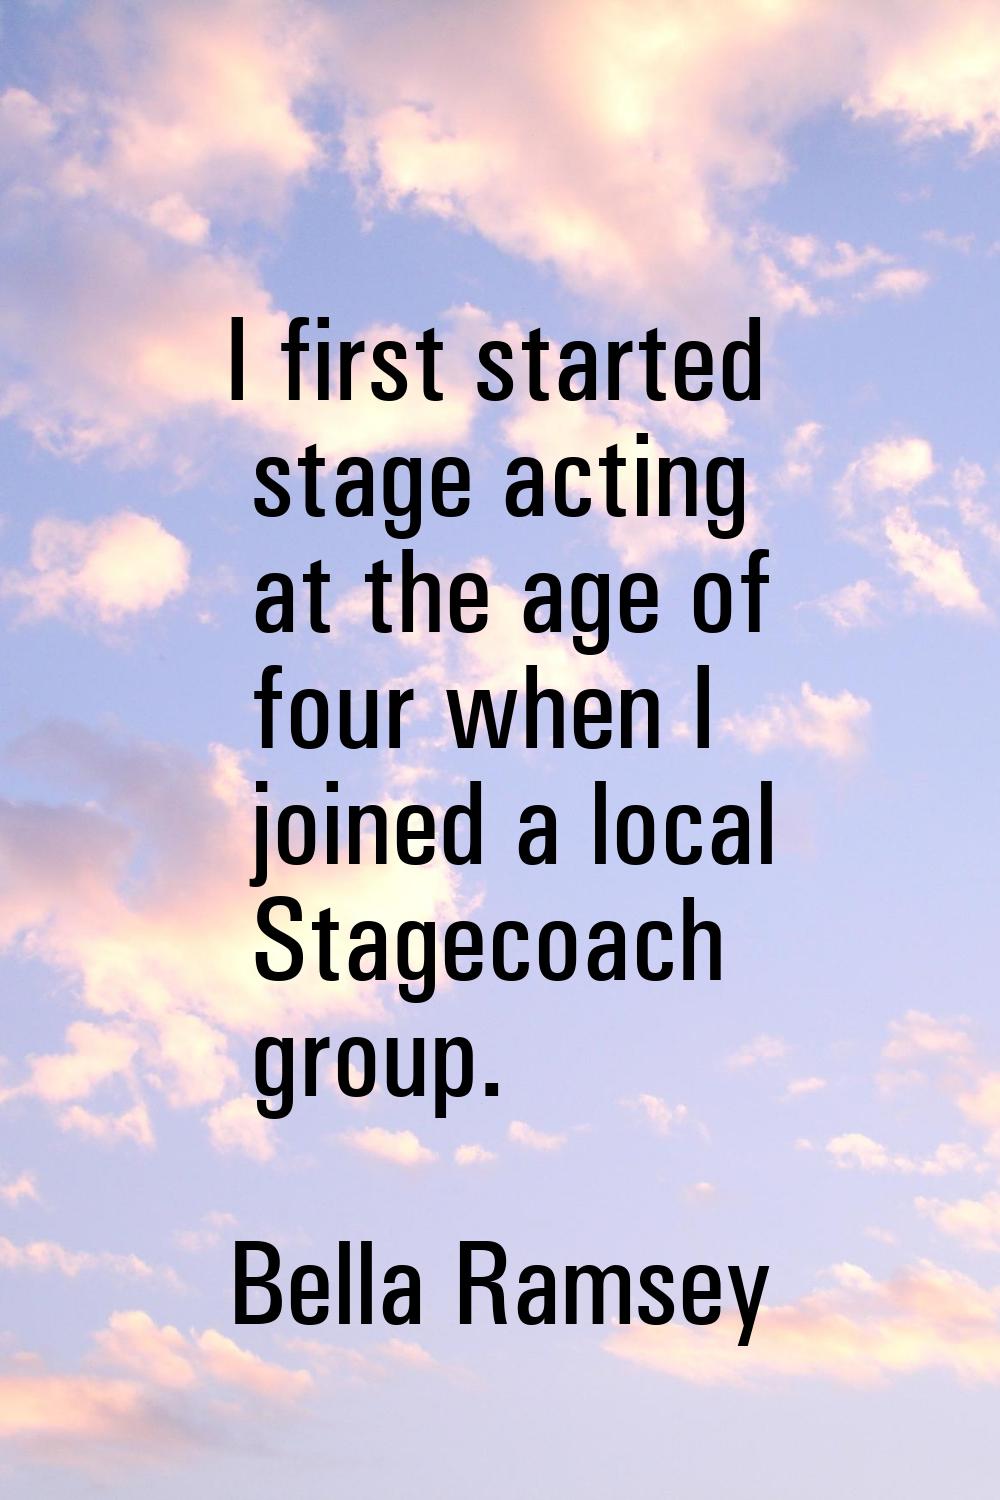 I first started stage acting at the age of four when I joined a local Stagecoach group.